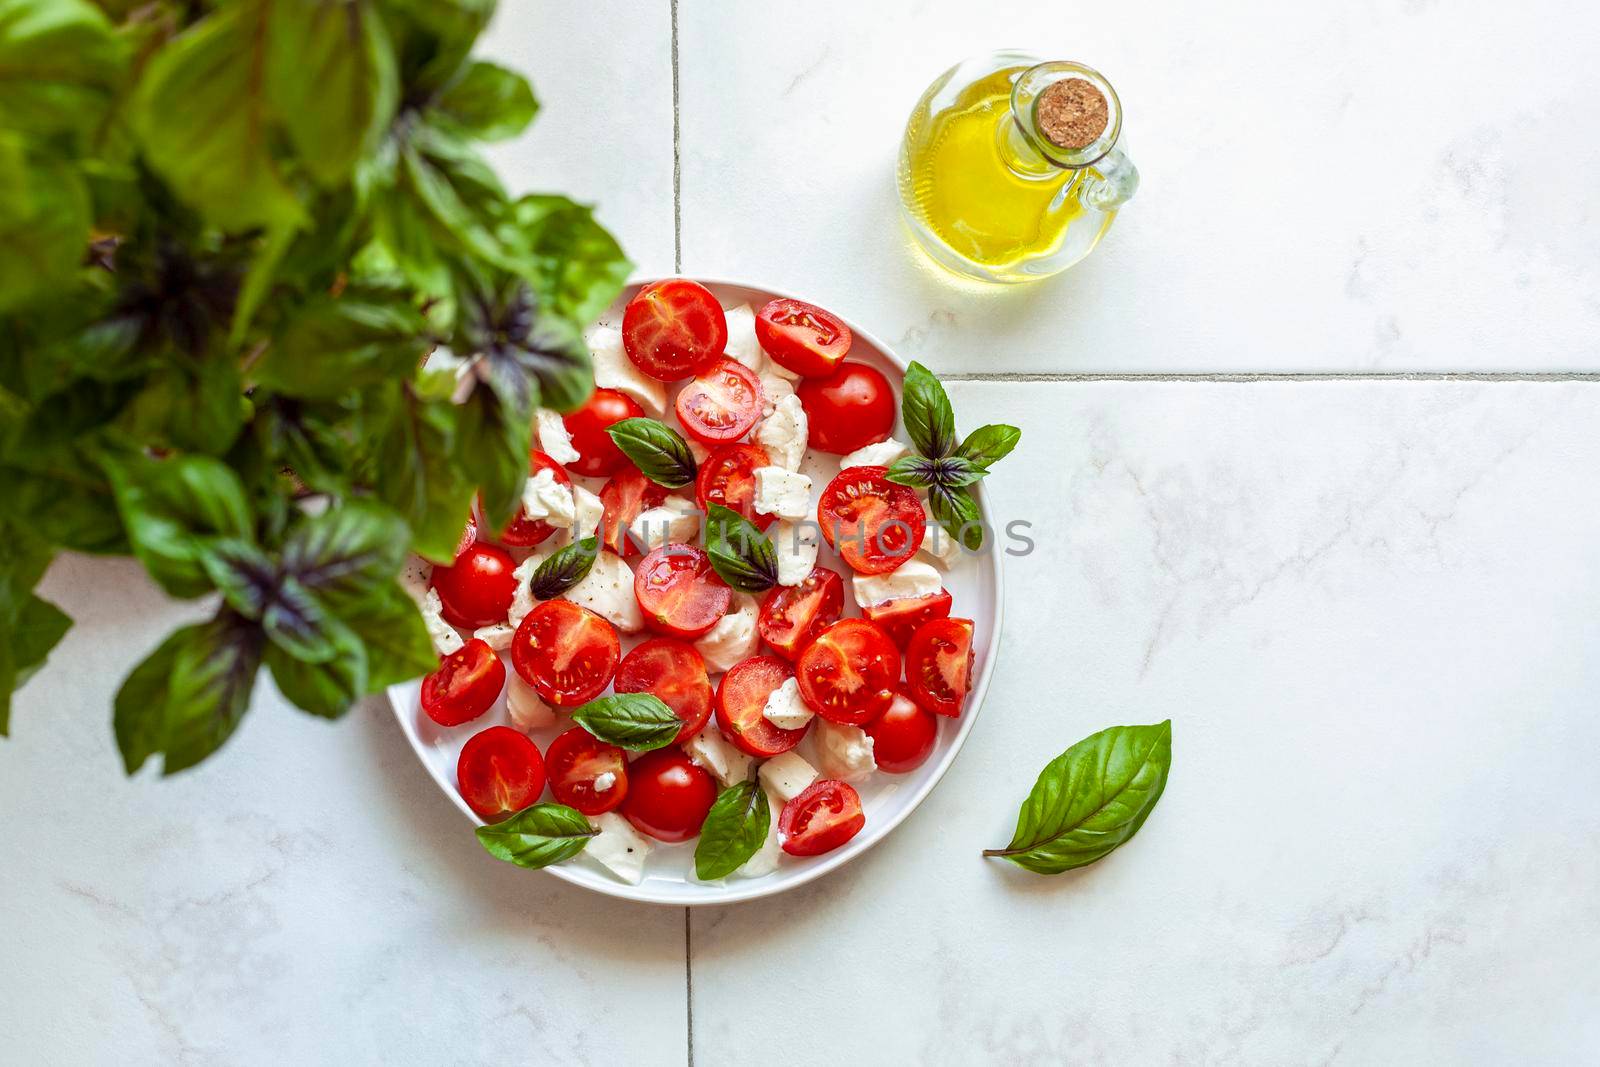 caprese salade served in a plate under a basil plant, home garden concept, top view